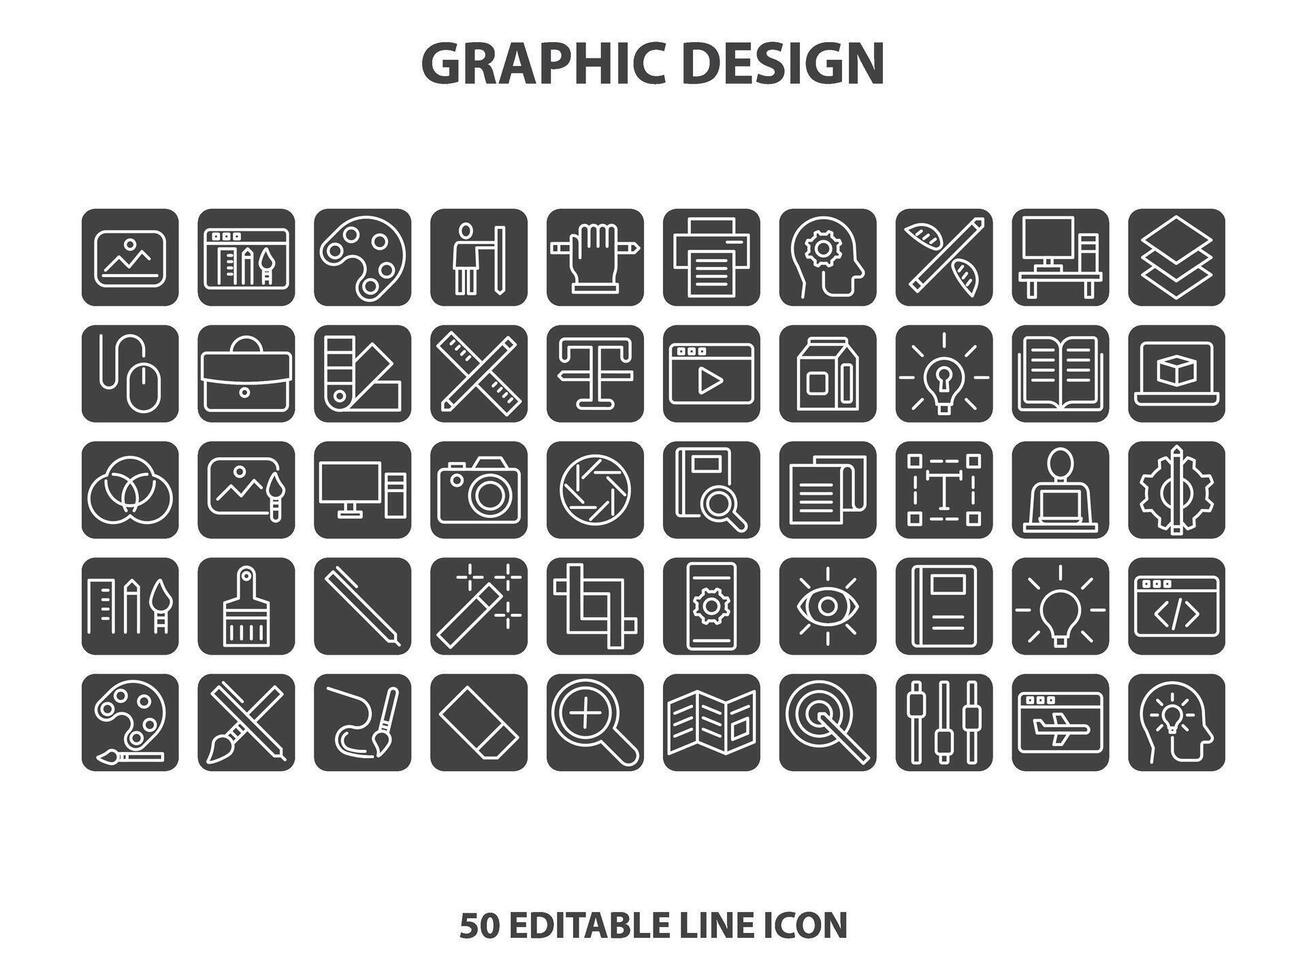 Graphic Design and Creativity Line Icons. Editable Stroke. Pixel Perfect. For Mobile and Web. Contains such icons as Creativity, Layout, Mobile App Design, Art Tools, Typography, vector